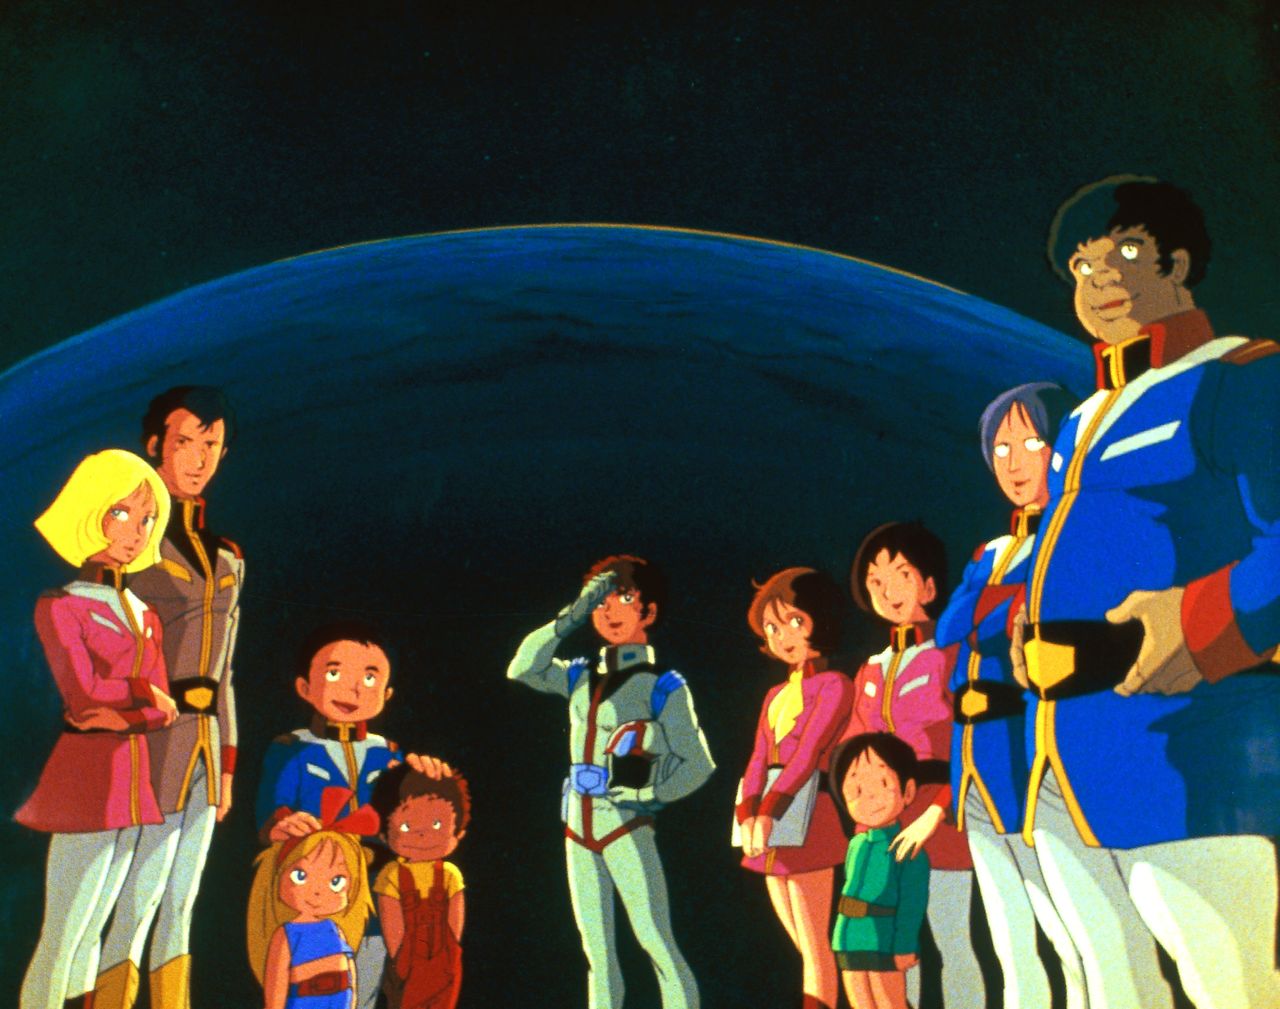 Amuro Ray (center) flanked by characters from Mobile Suits Gundam in a still image used during the ending credits of the show. (© Sōtsū/Sunrise)